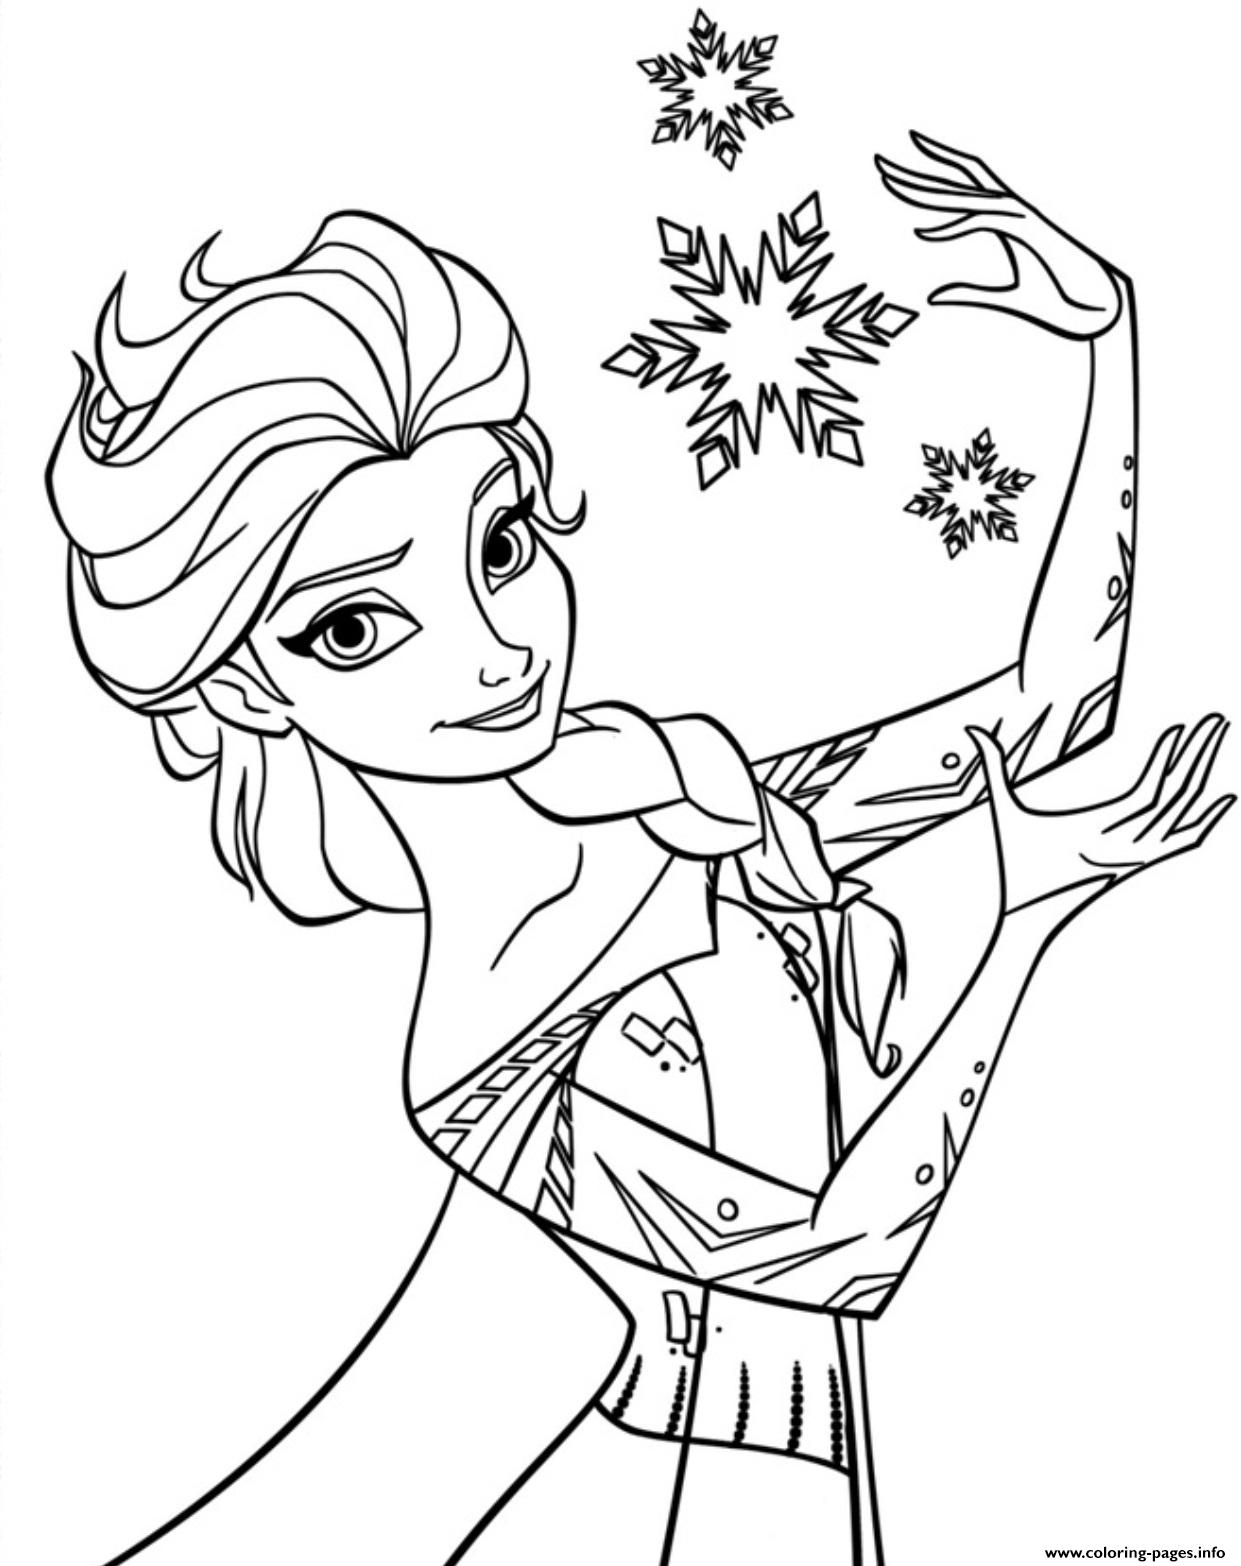 Frozen 2 Free Coloring Pages Frozen coloring pages printable color getcolorings print 51b